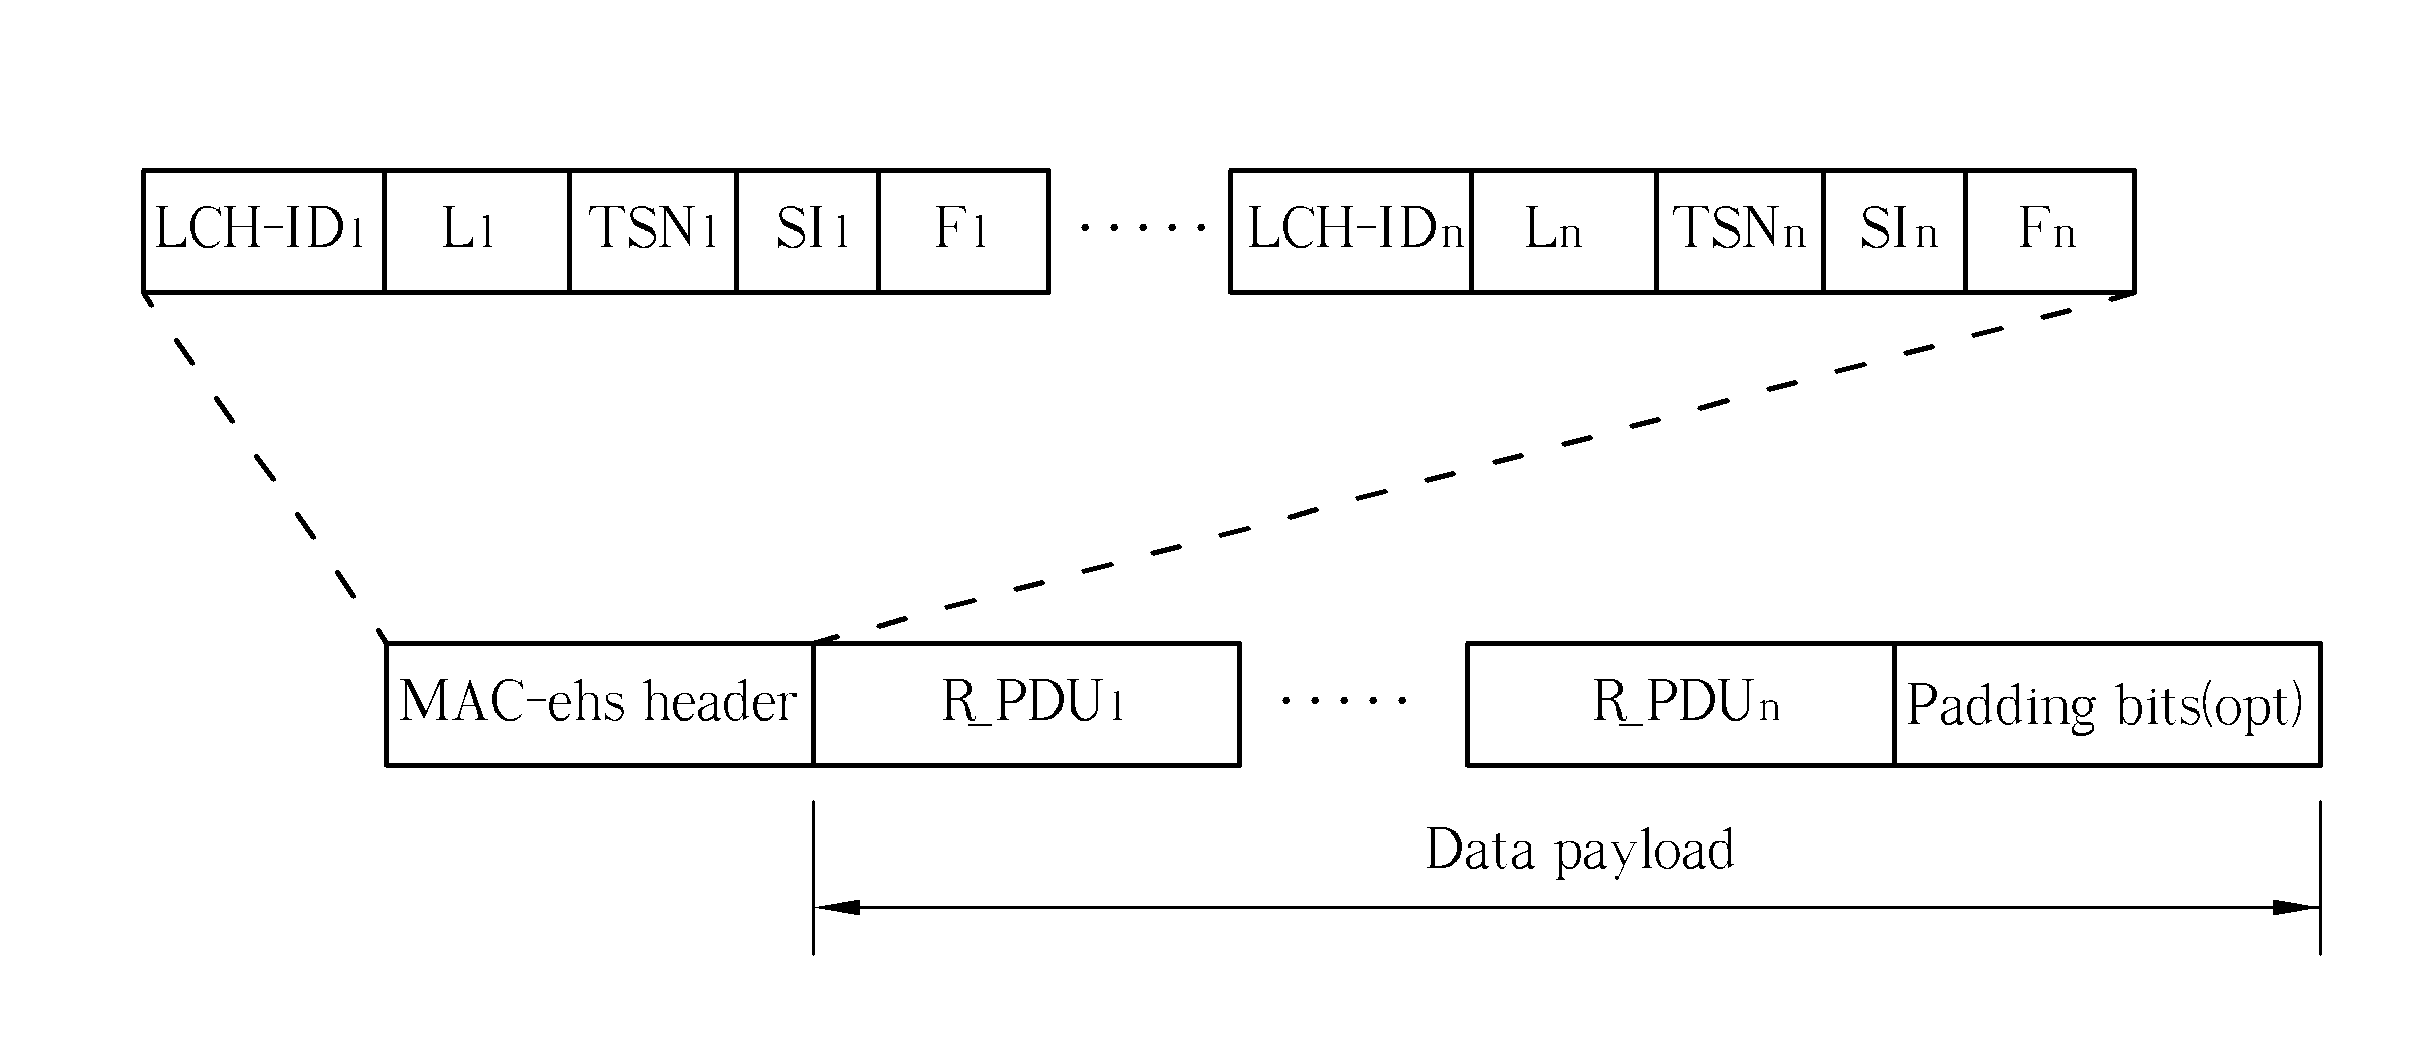 Method and Apparatus of Improving Reset of Evolved Media Access Control Protocol Entity in a Wireless Communications System